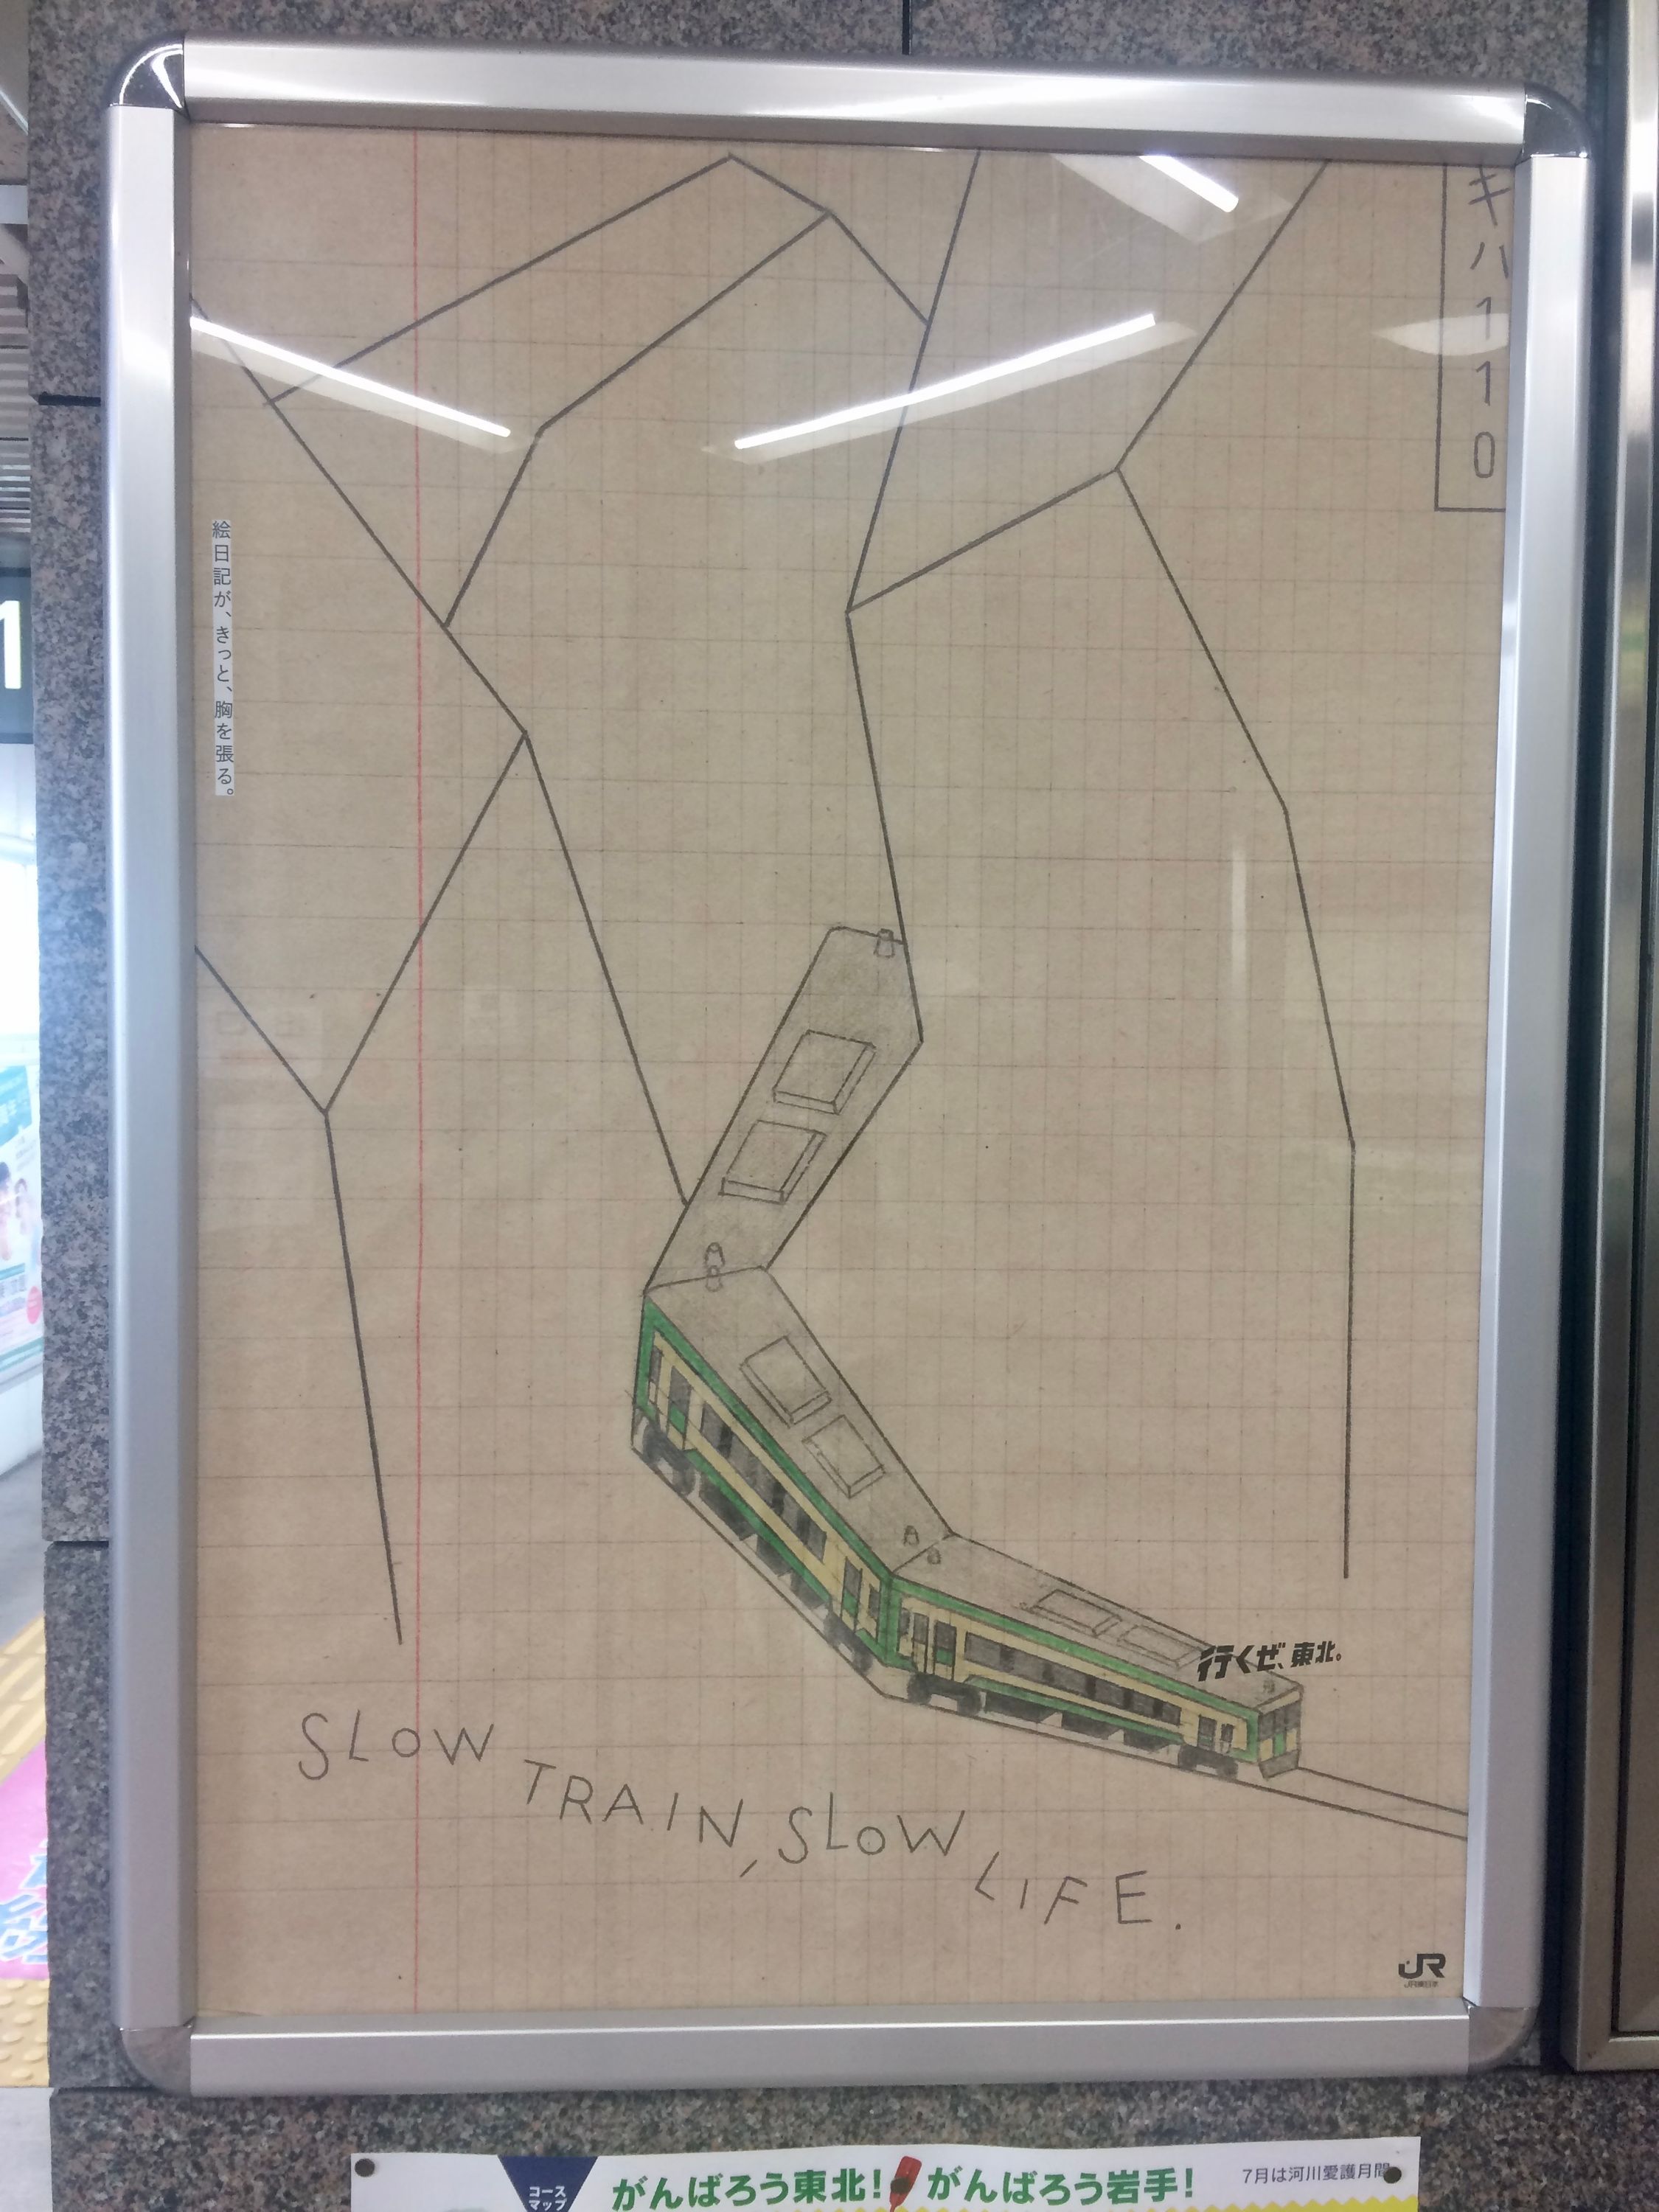 A child’s drawing of a train captioned “Slow Train, Slow Life”.